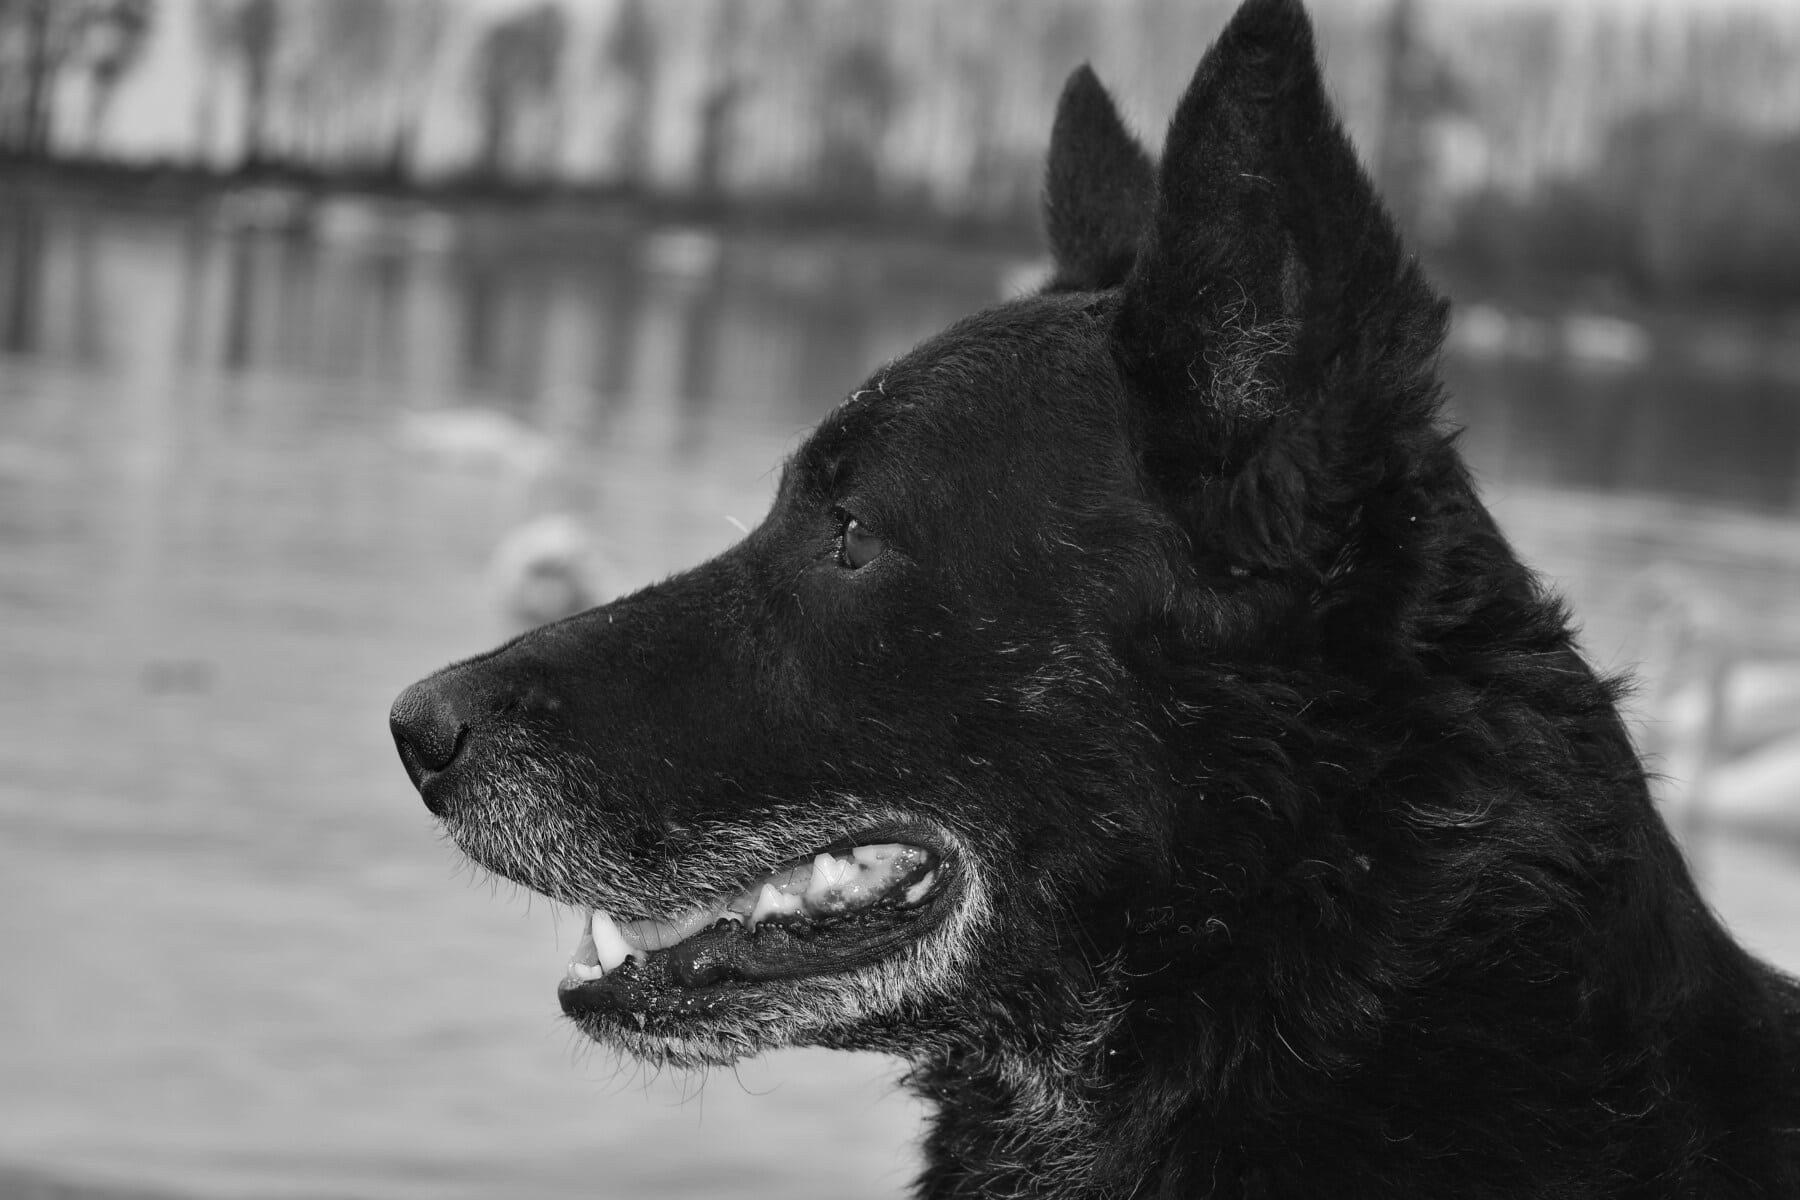 Free picture: black, dog, shepherd dog, monochrome, teeth, mouth, side  view, fur, canine, animal